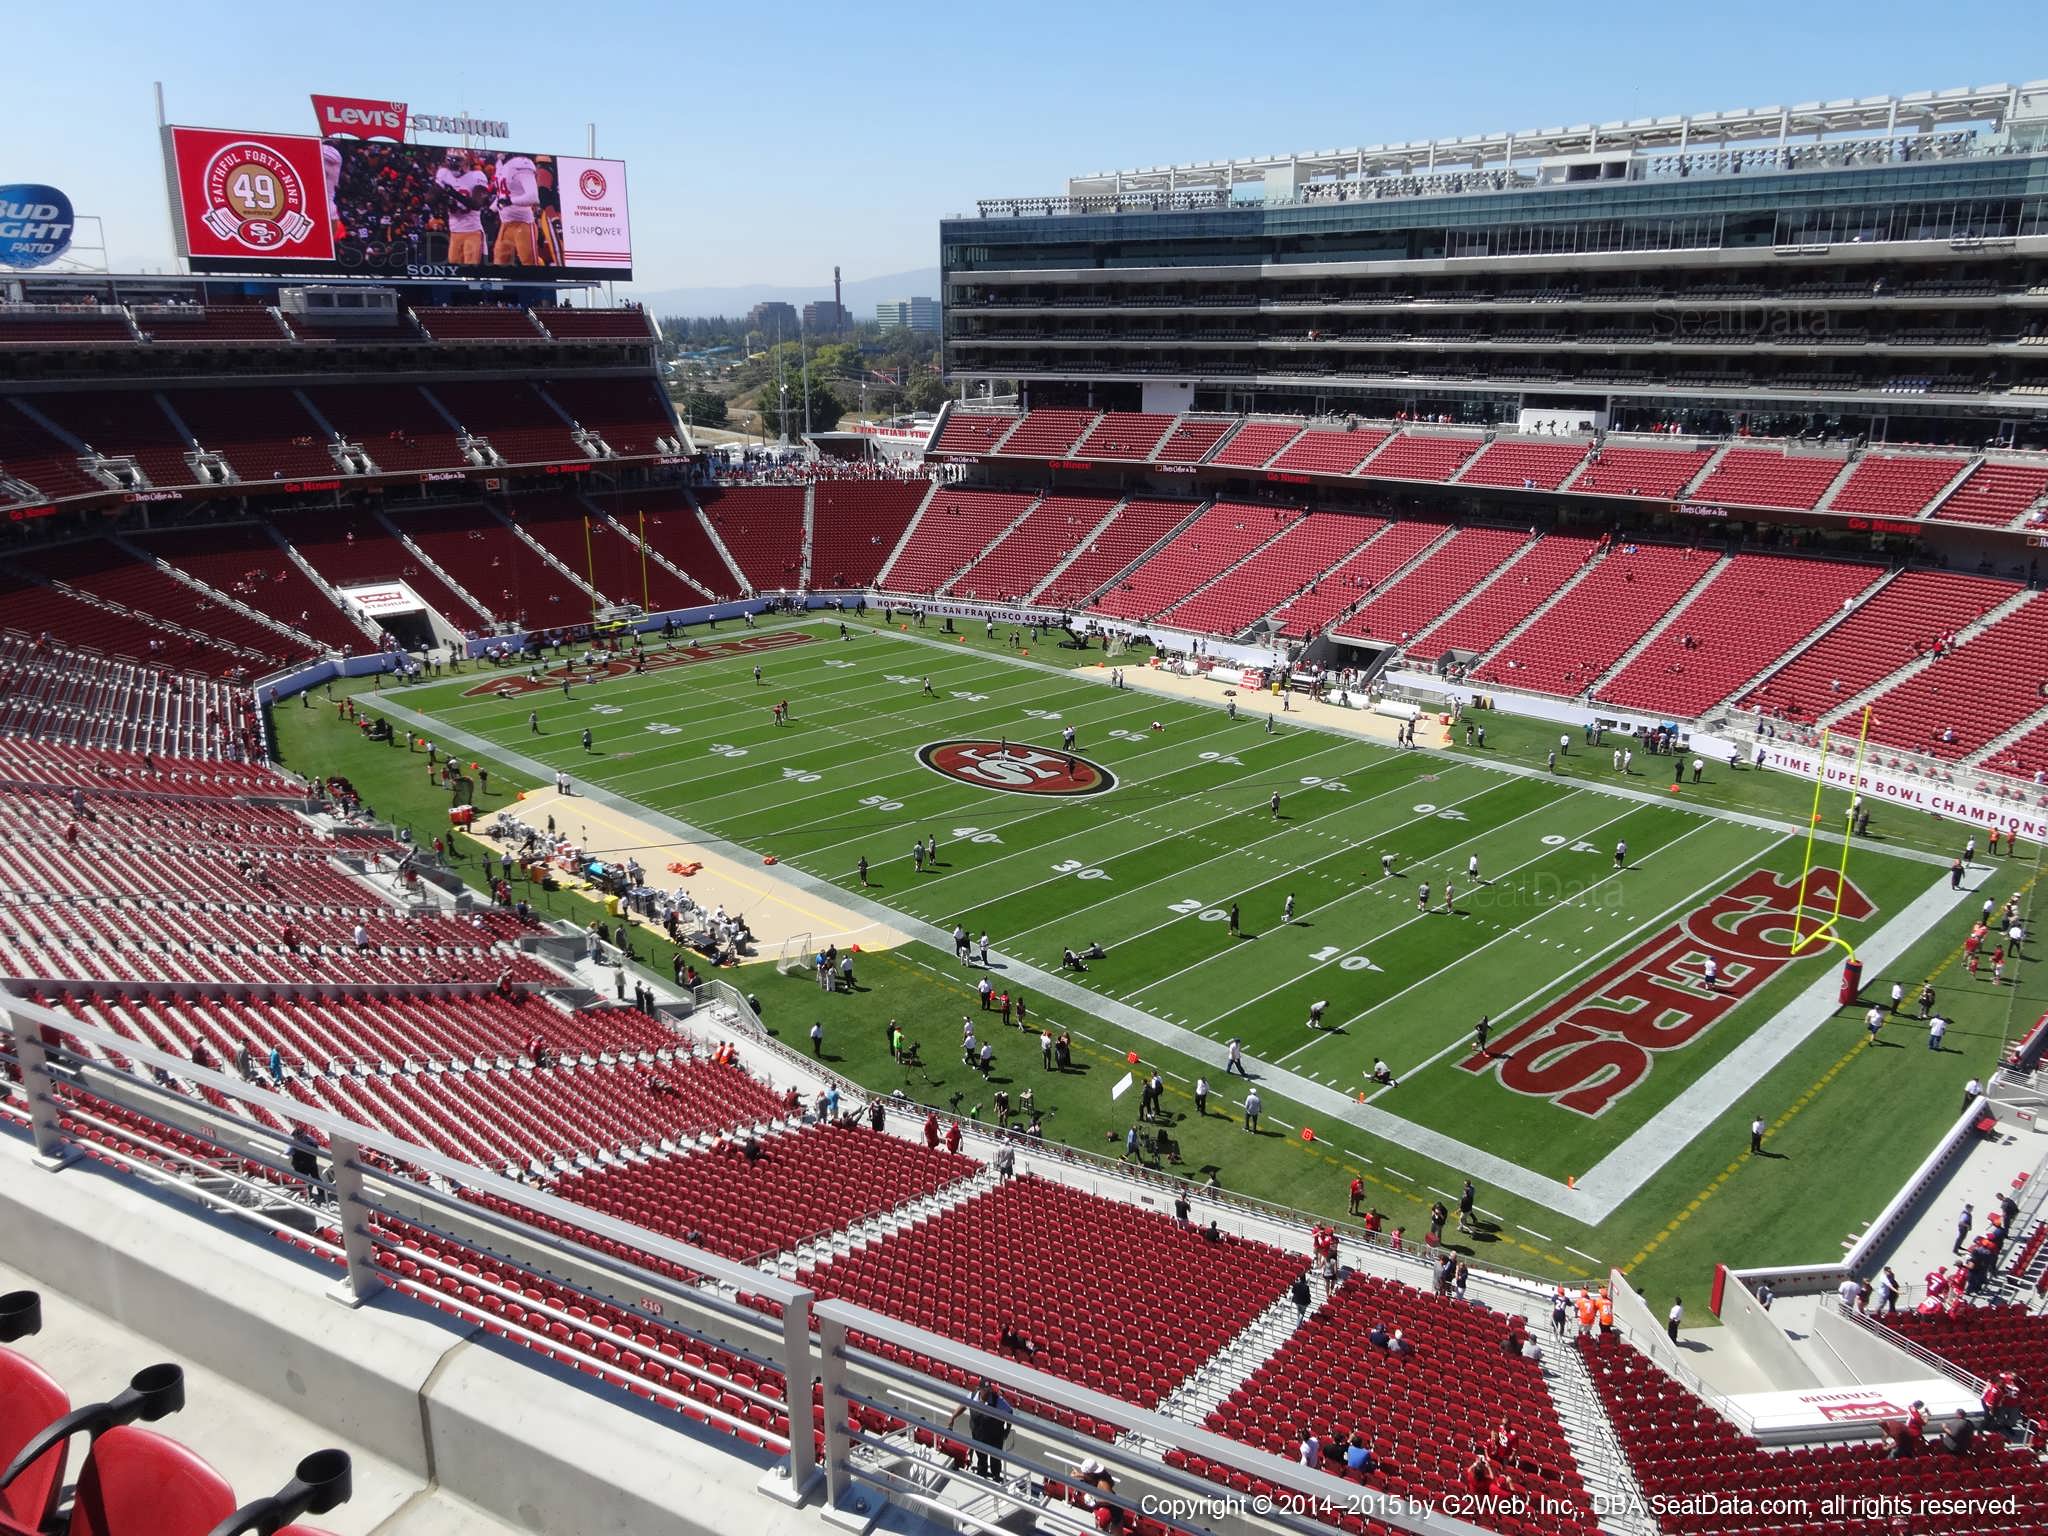 Seat view from section 309 at Levi’s Stadium, home of the San Francisco 49ers